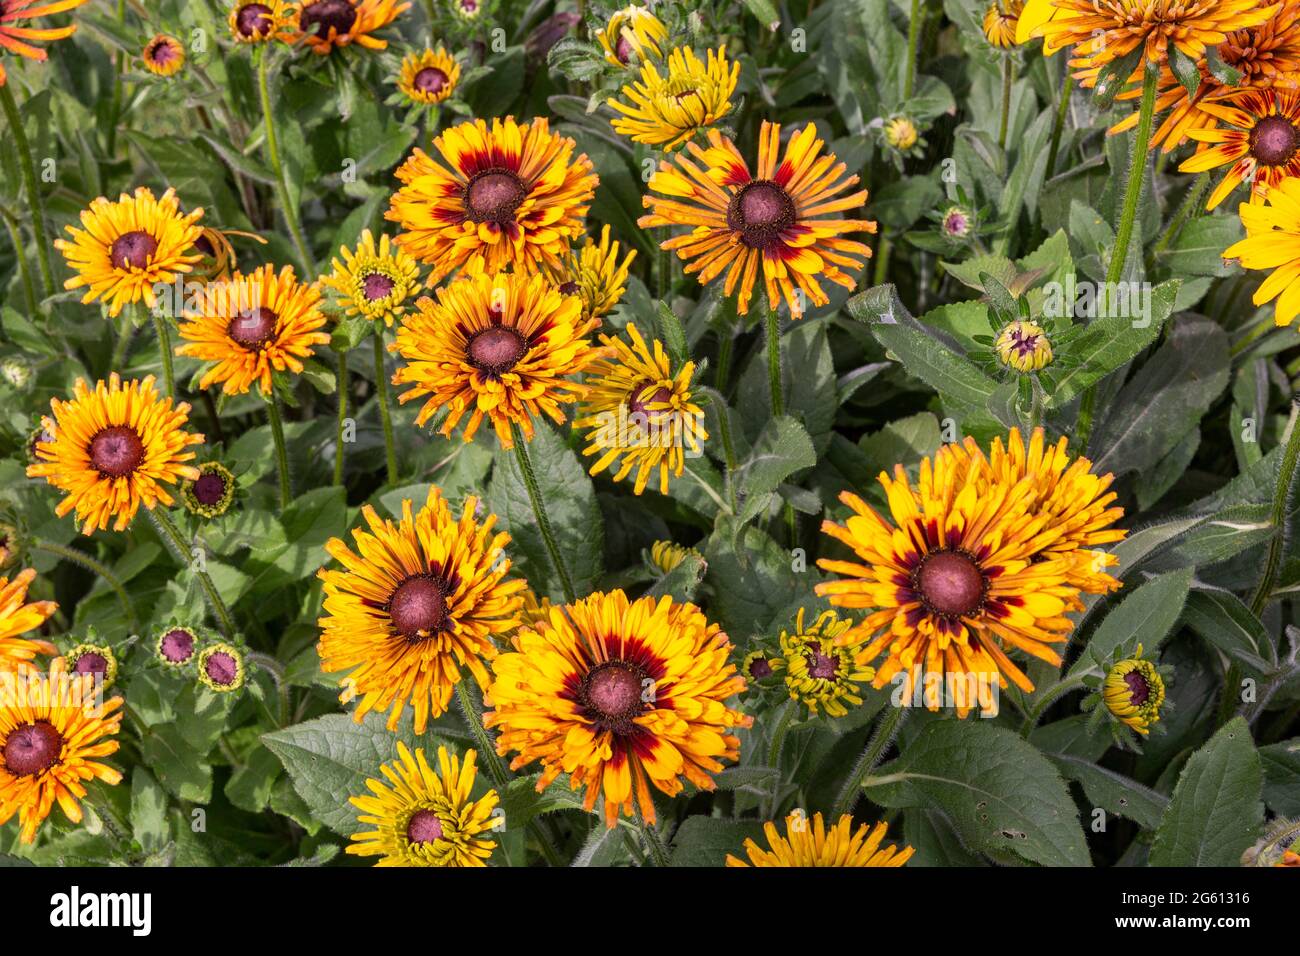 France, Ille et Vilaine, Corps Nuds, La Lande aux Pitois, Rocambole gardens, Artistic vegetable and botanical gardens in organic farming, A meeting between art and Nature, Rudbeckia Chim Chiminee or Rudbeckie bristly (Rudbeckia hirta), in flower Stock Photo